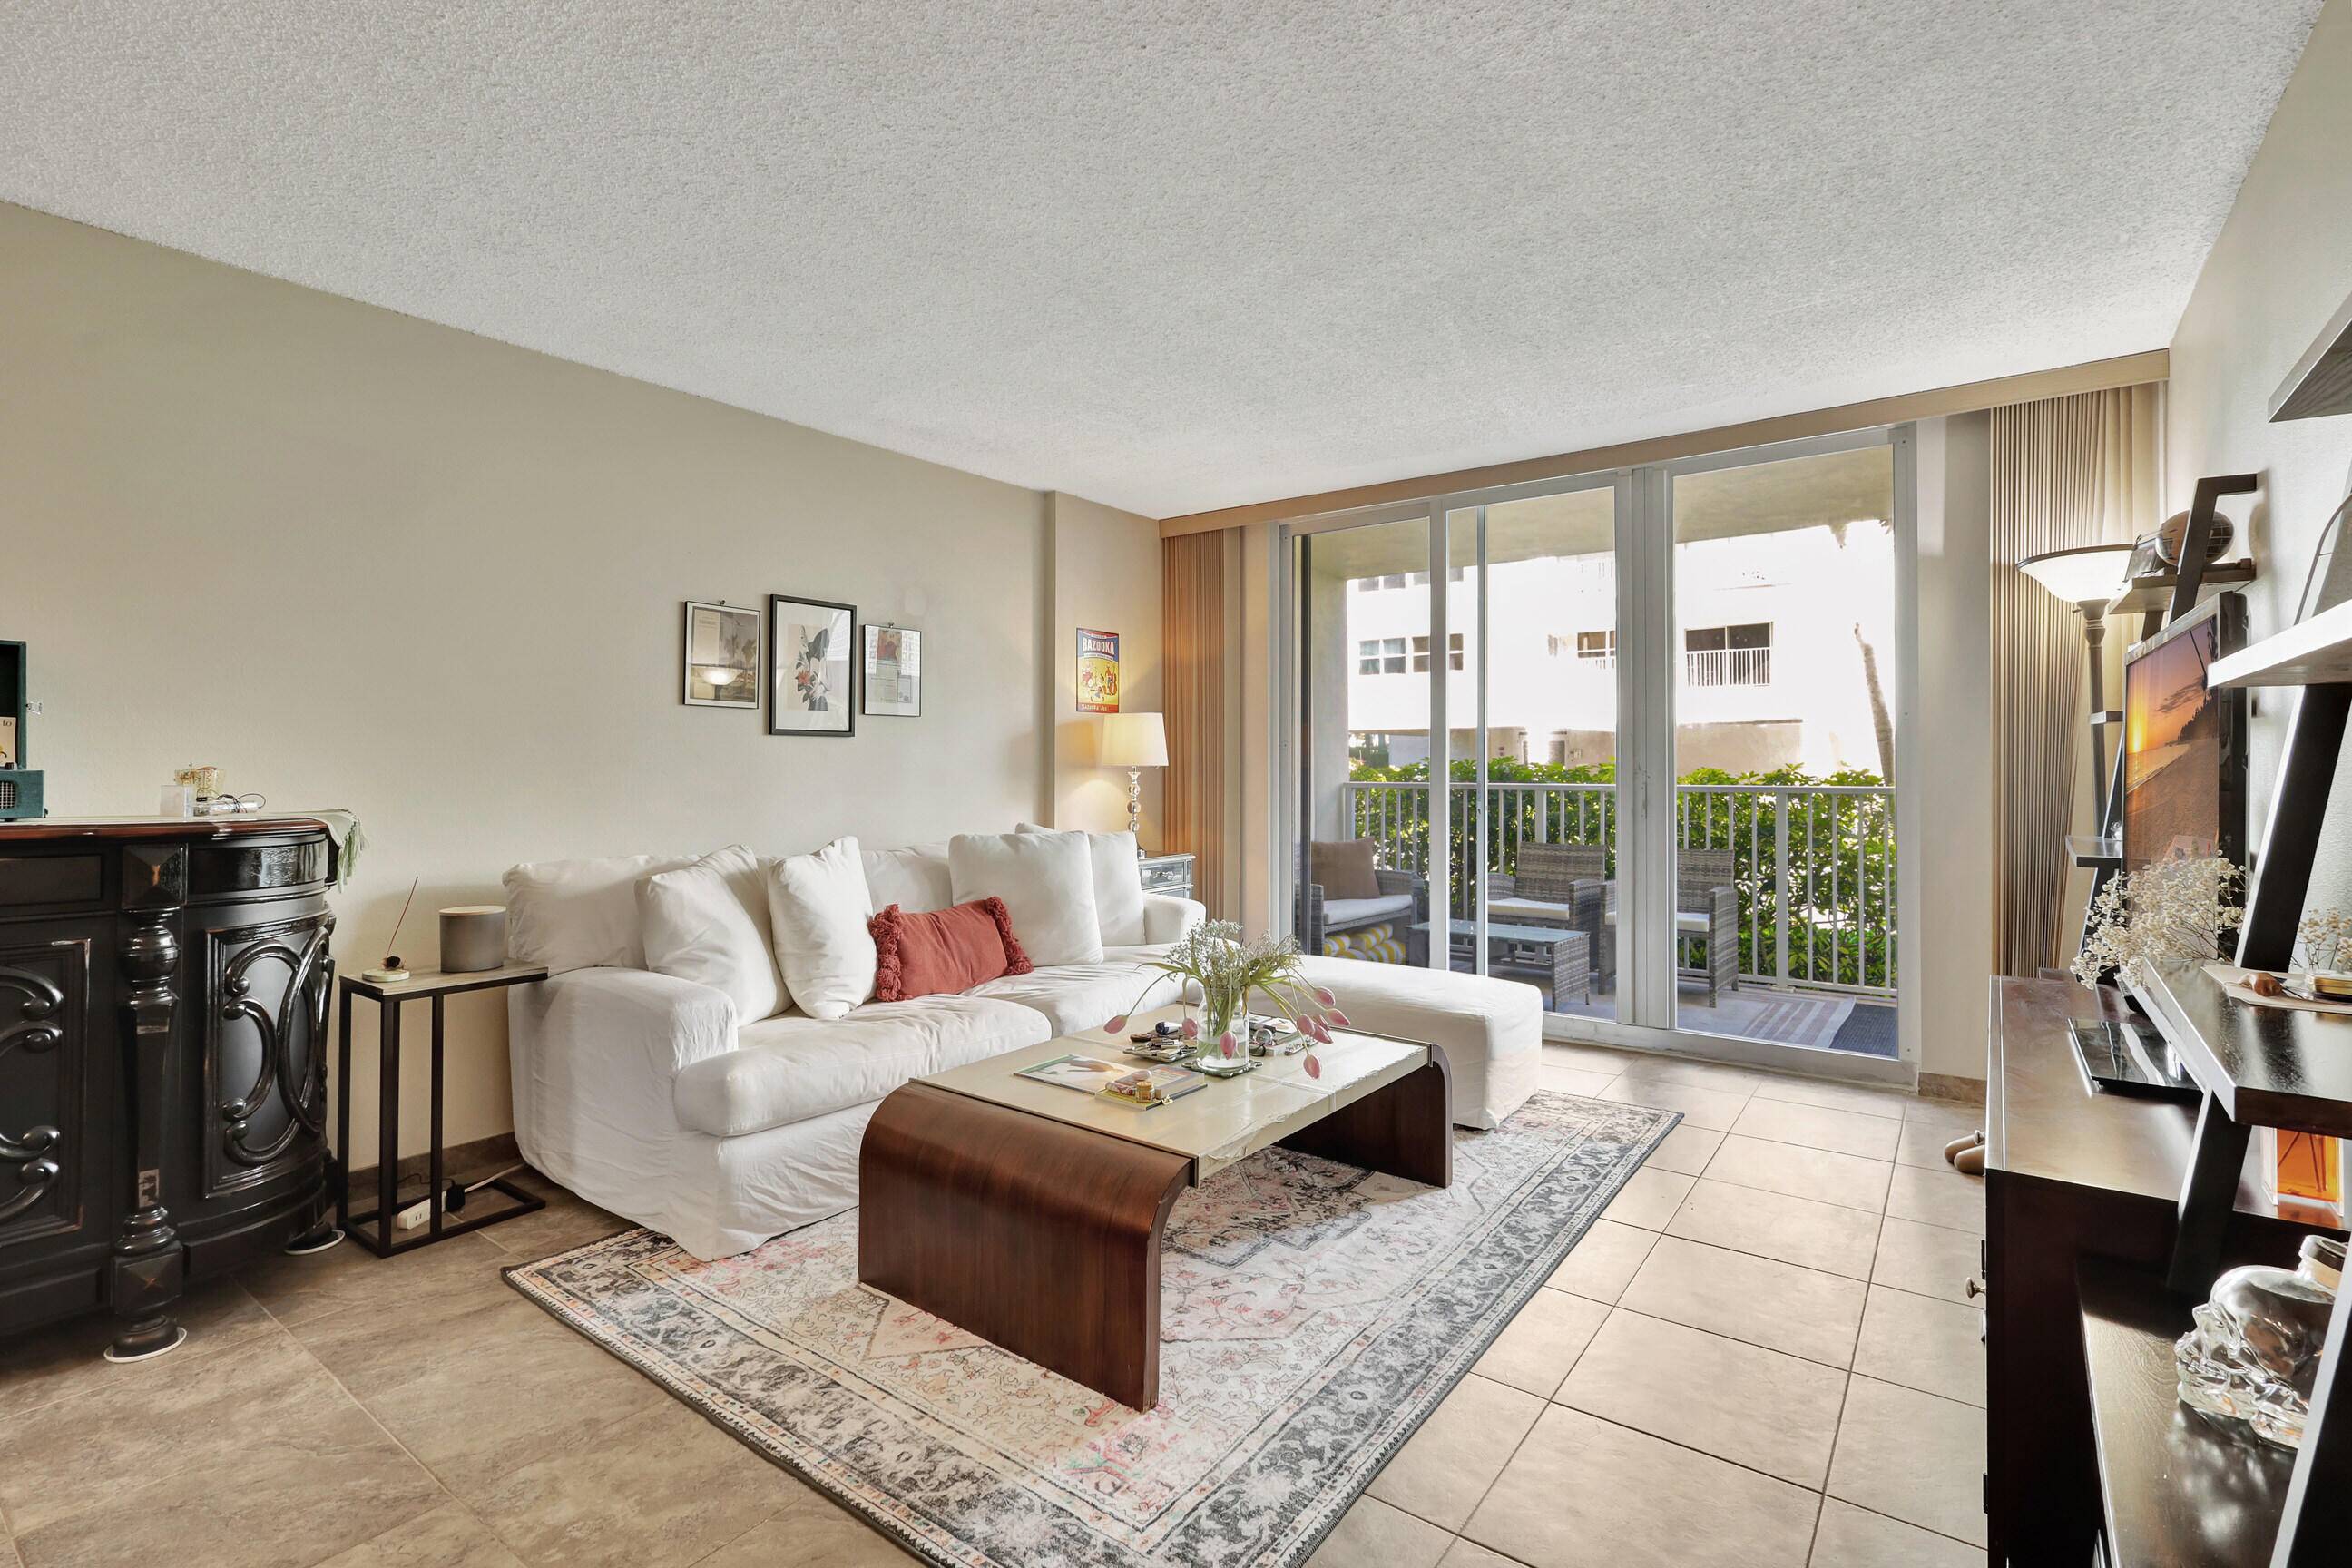 Step into your own slice of paradise with this fabulous 1 bedroom, 1 1 2 bathroom beach condo.